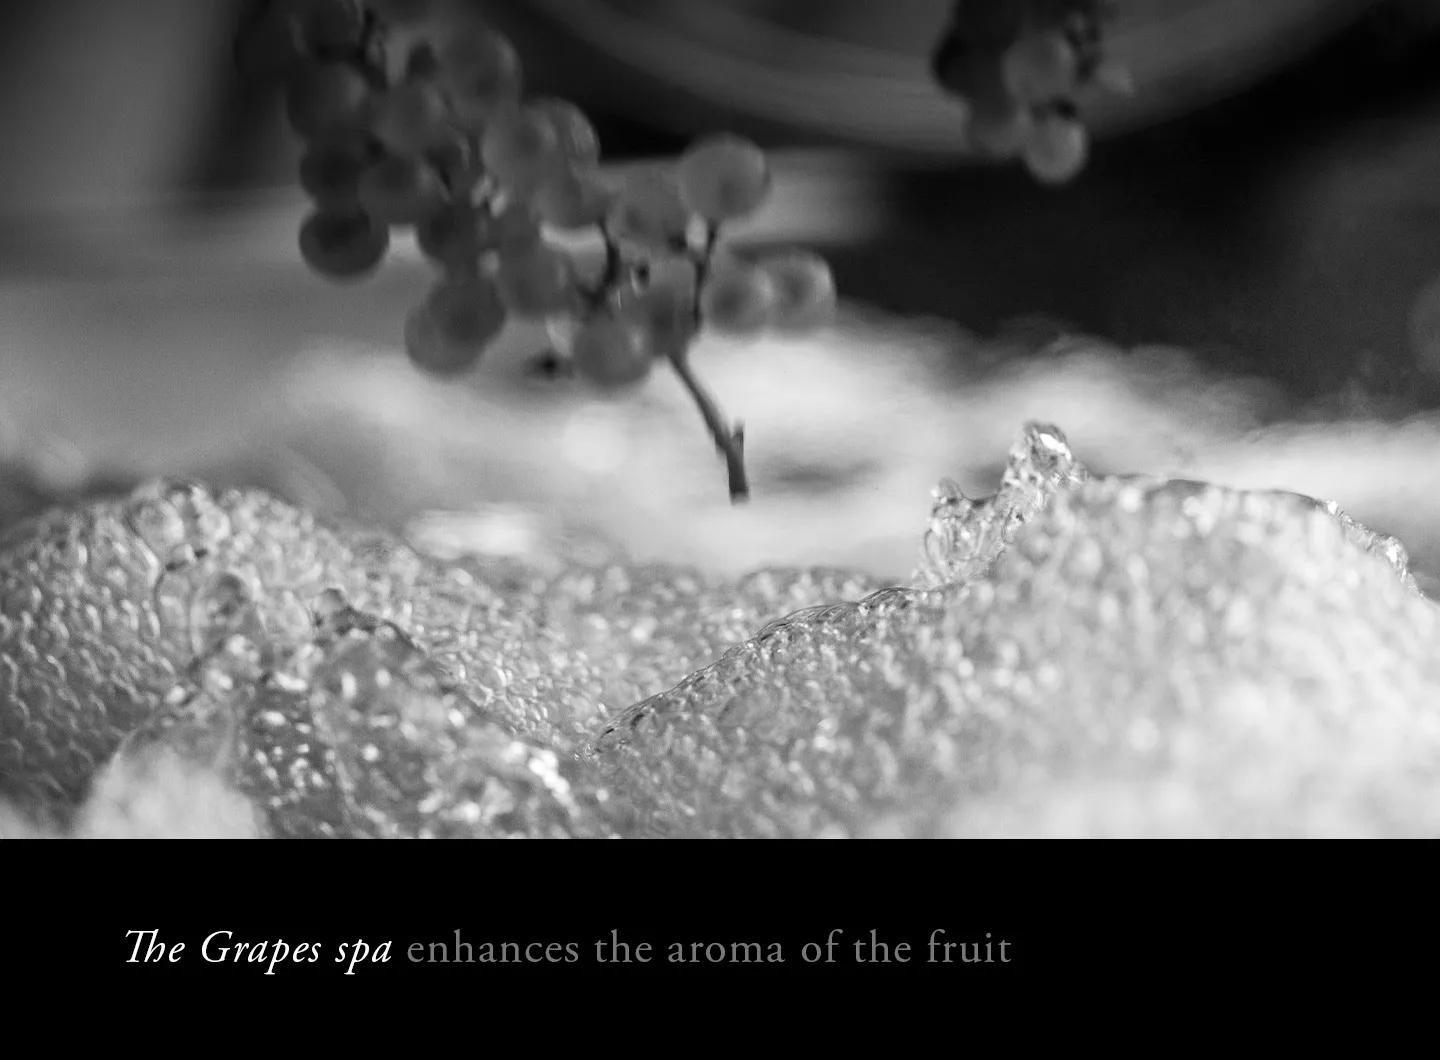 The Grapes spa enhances the aroma of the fruit